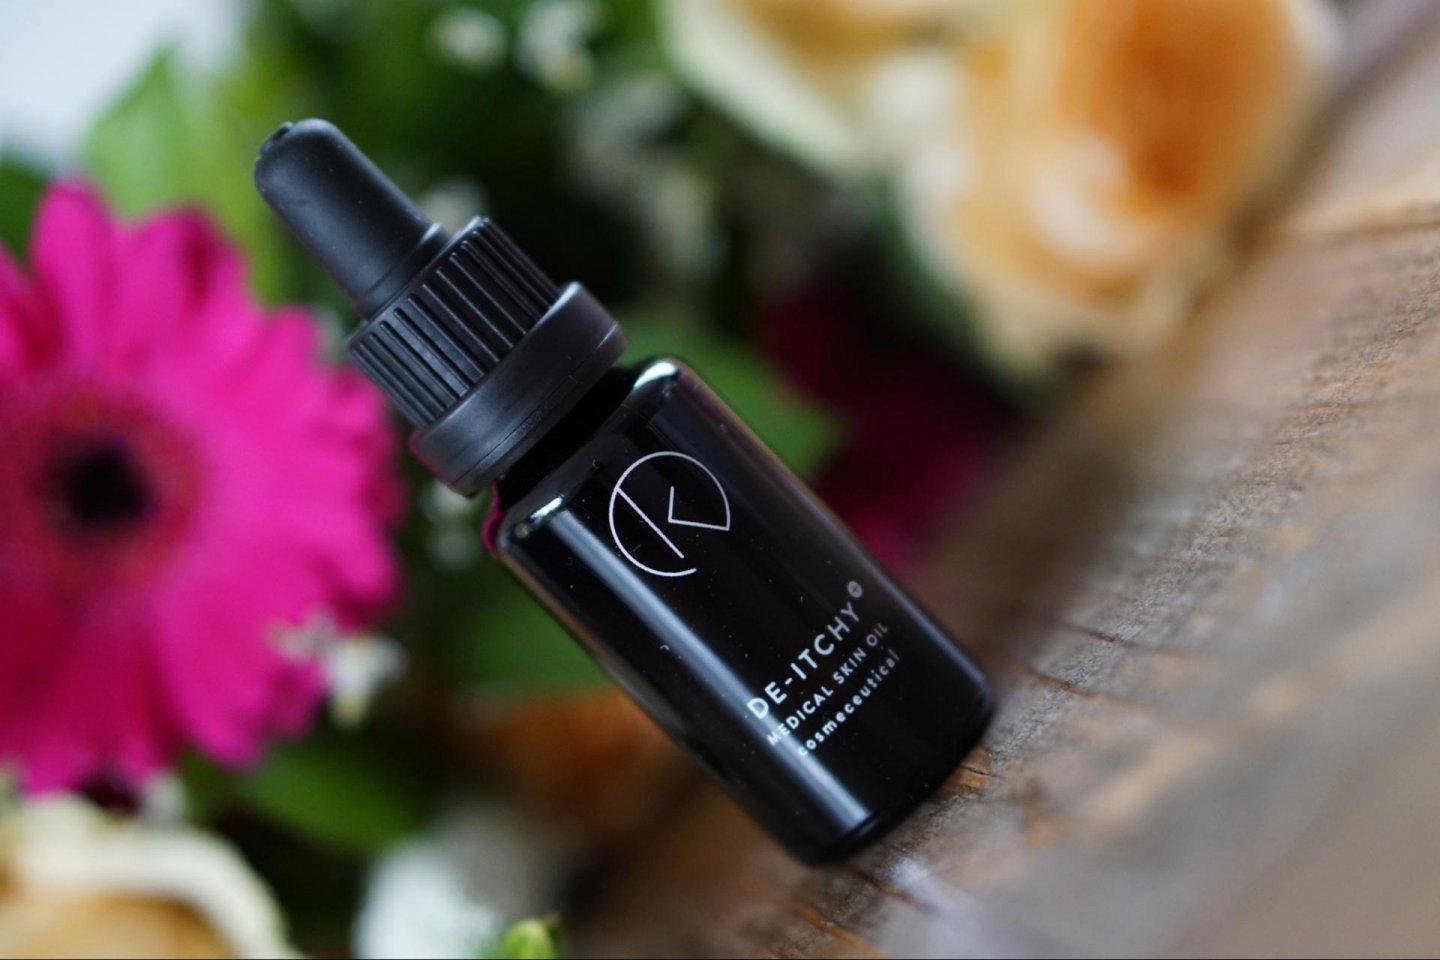 DE-ITCHY+ MEDICAL SKIN OIL ik skin perfection review